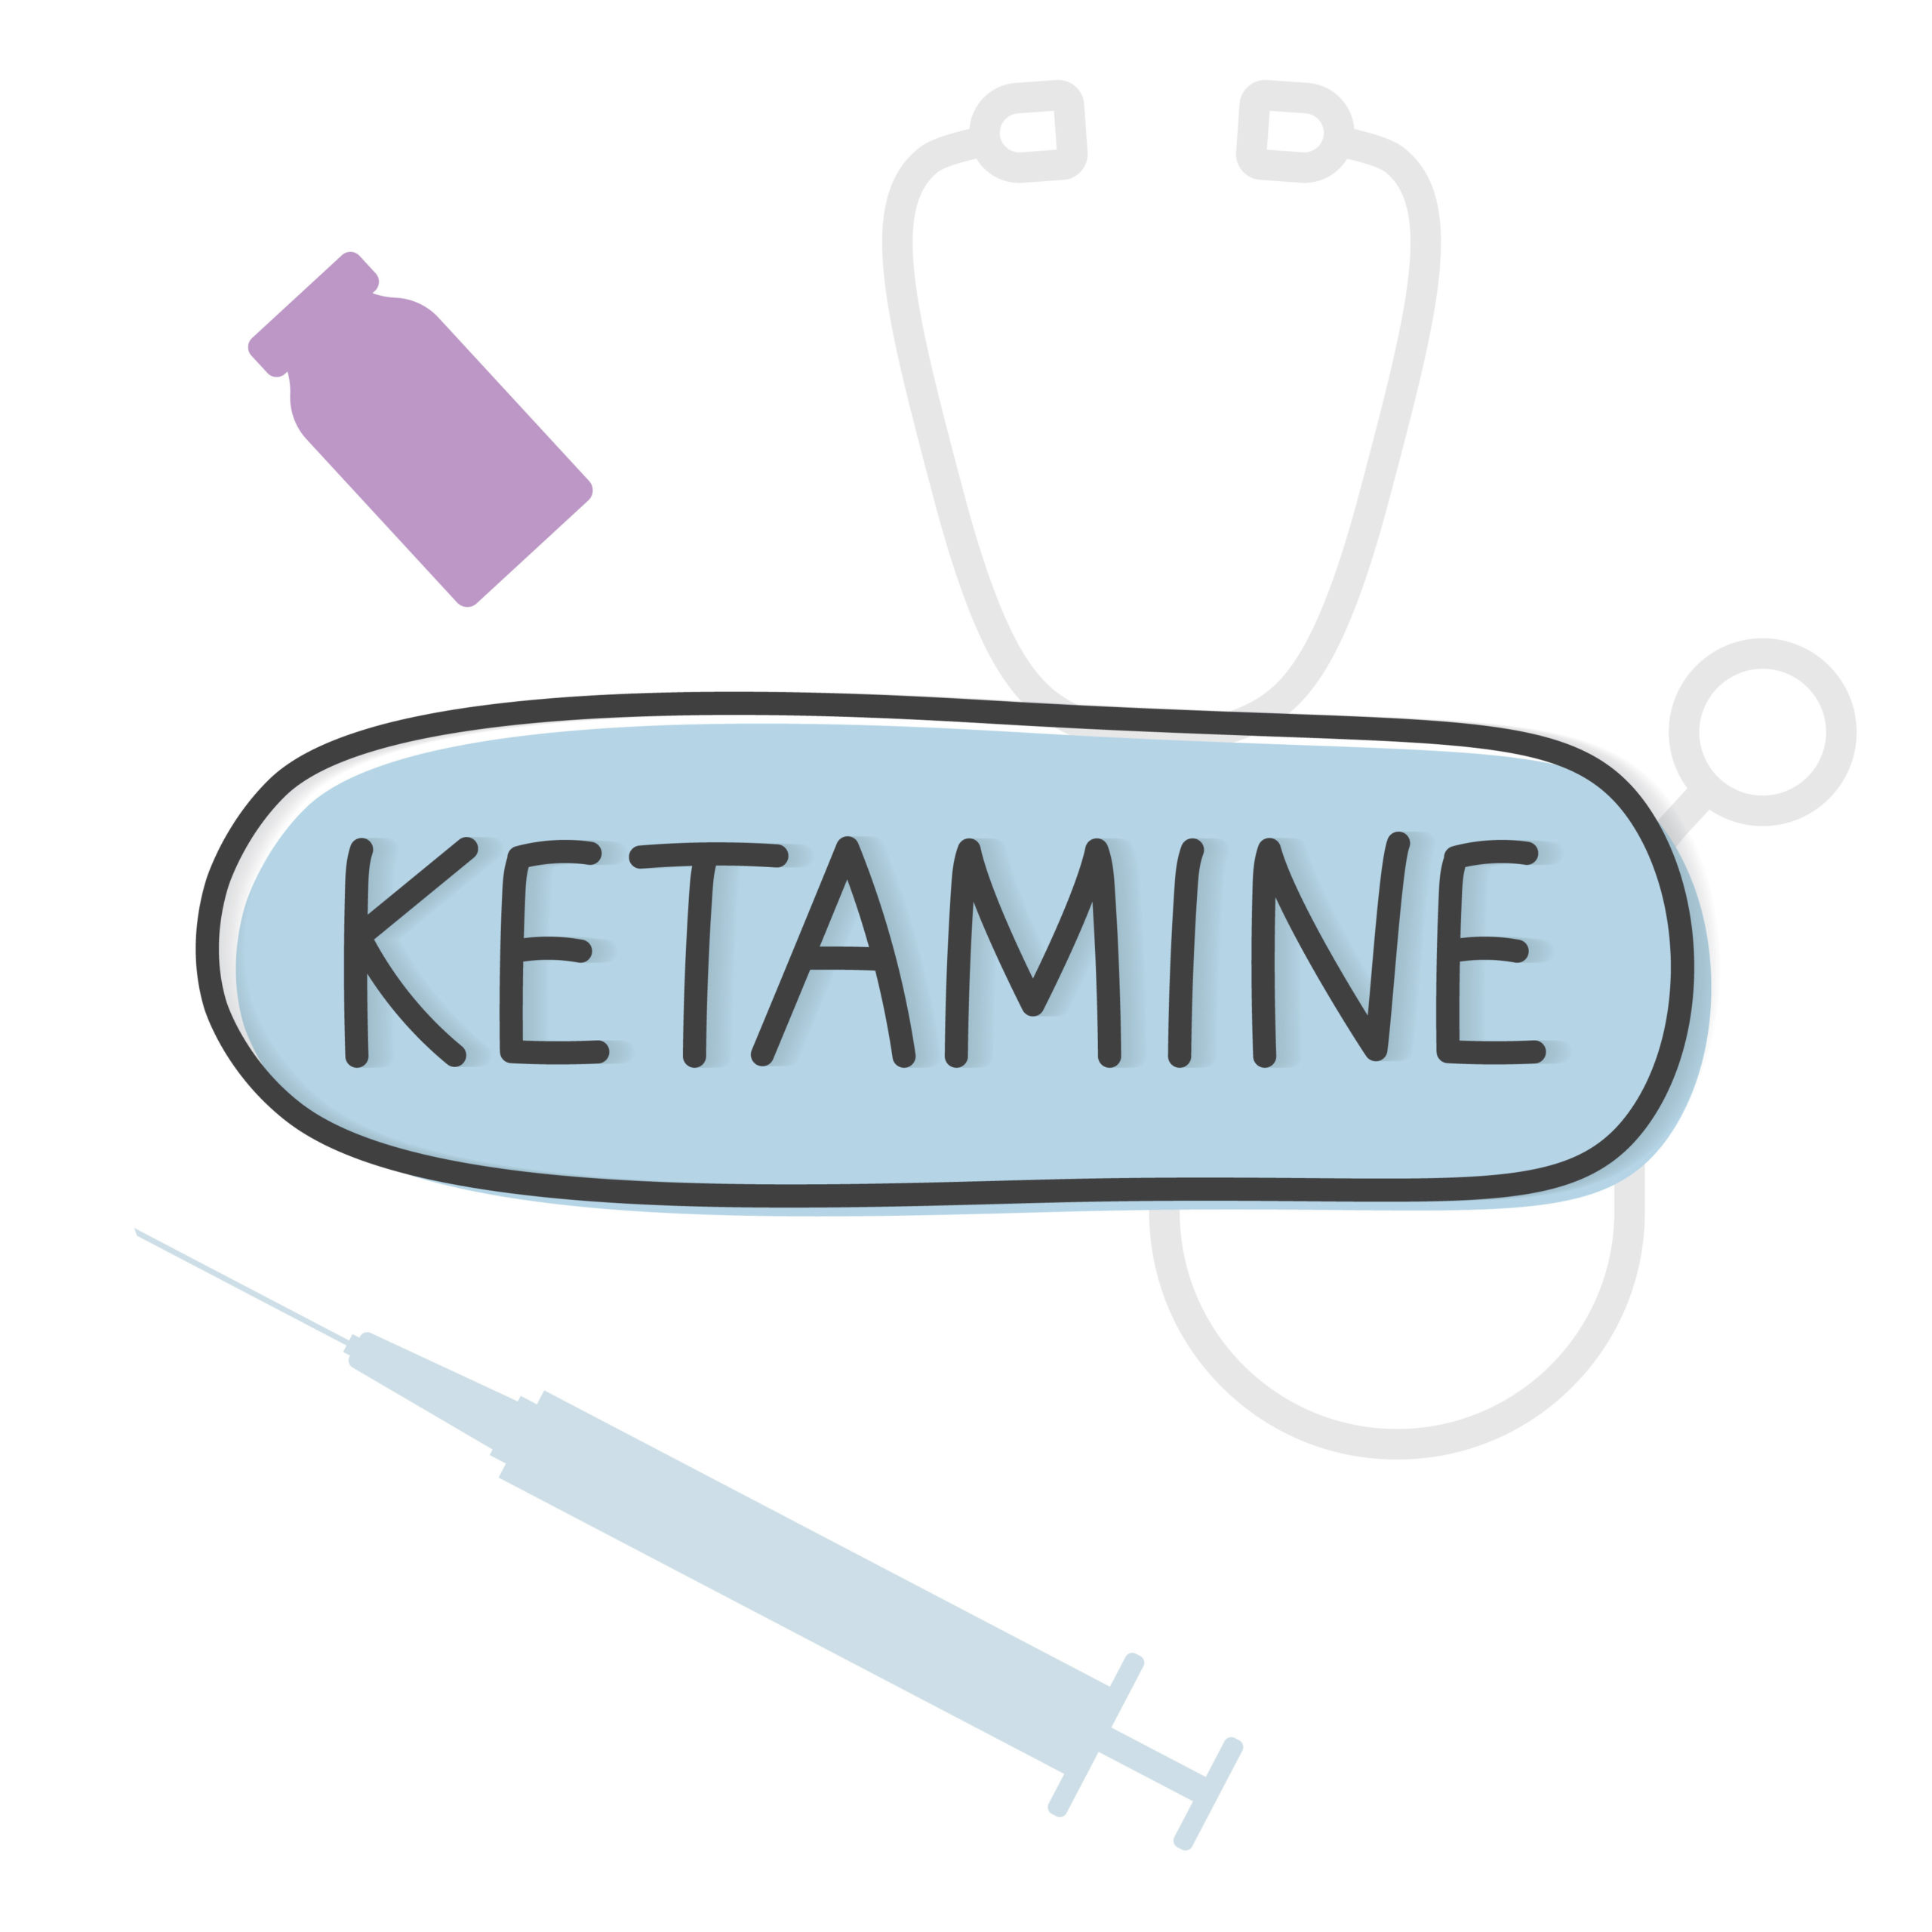 Can Ketamine Therapy Help With Anxiety